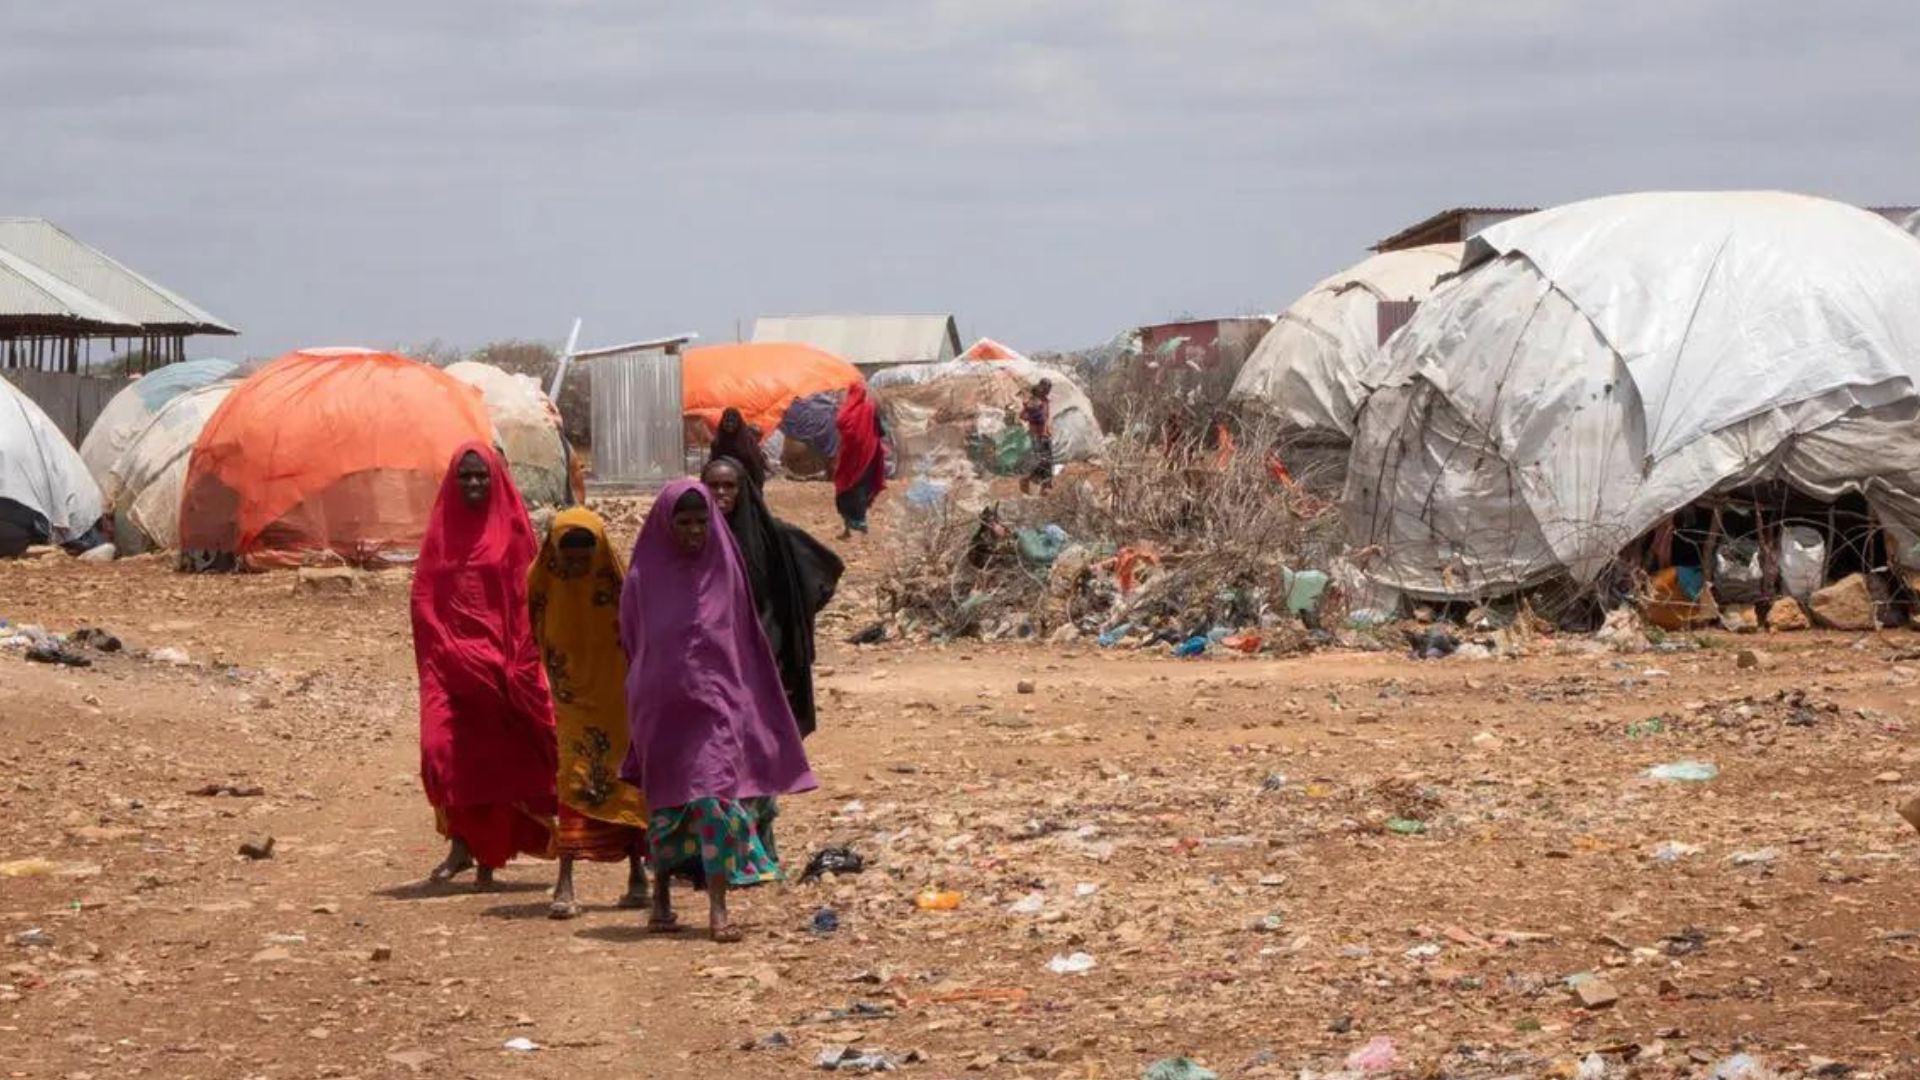 An overcrowded refugee camp one in Baidoa, in Somalia's South West State.
/Nabil Narch/UNHCR
